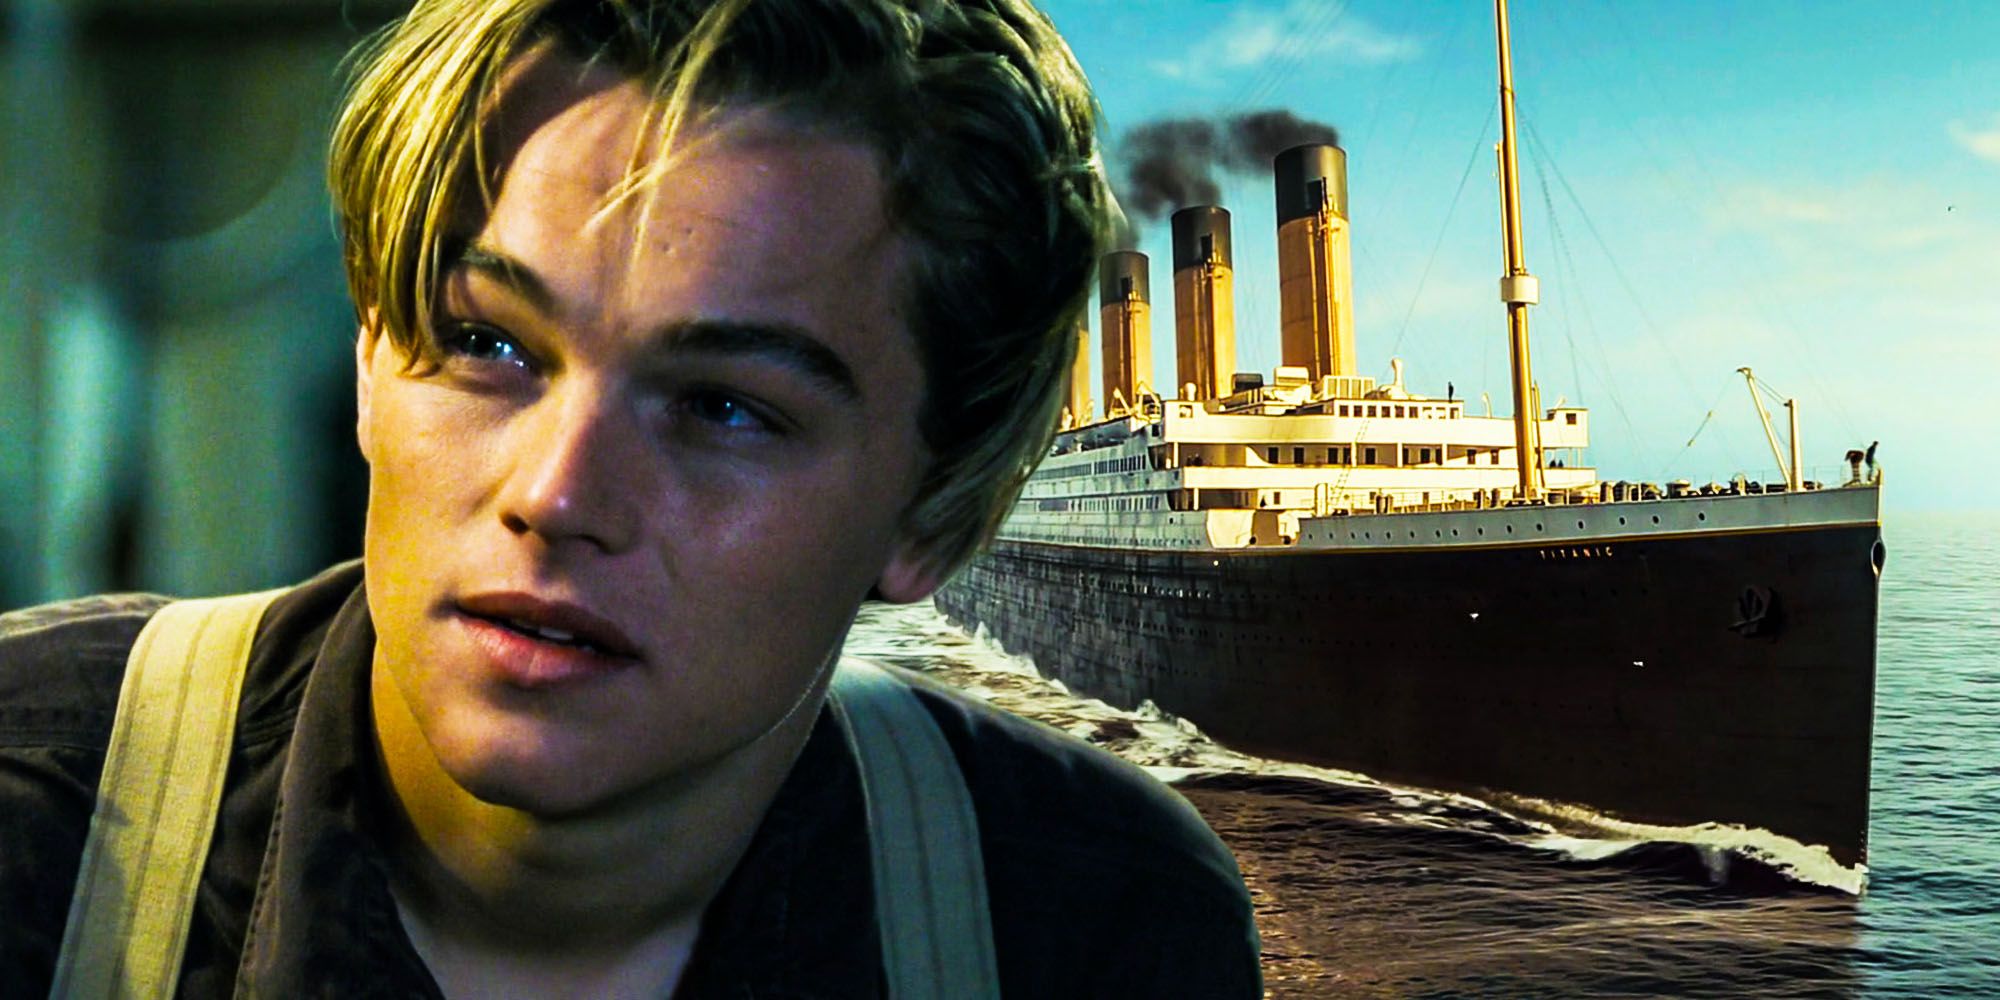 Titanic (1997) directed by James Cameron • Reviews, film + cast • Letterboxd